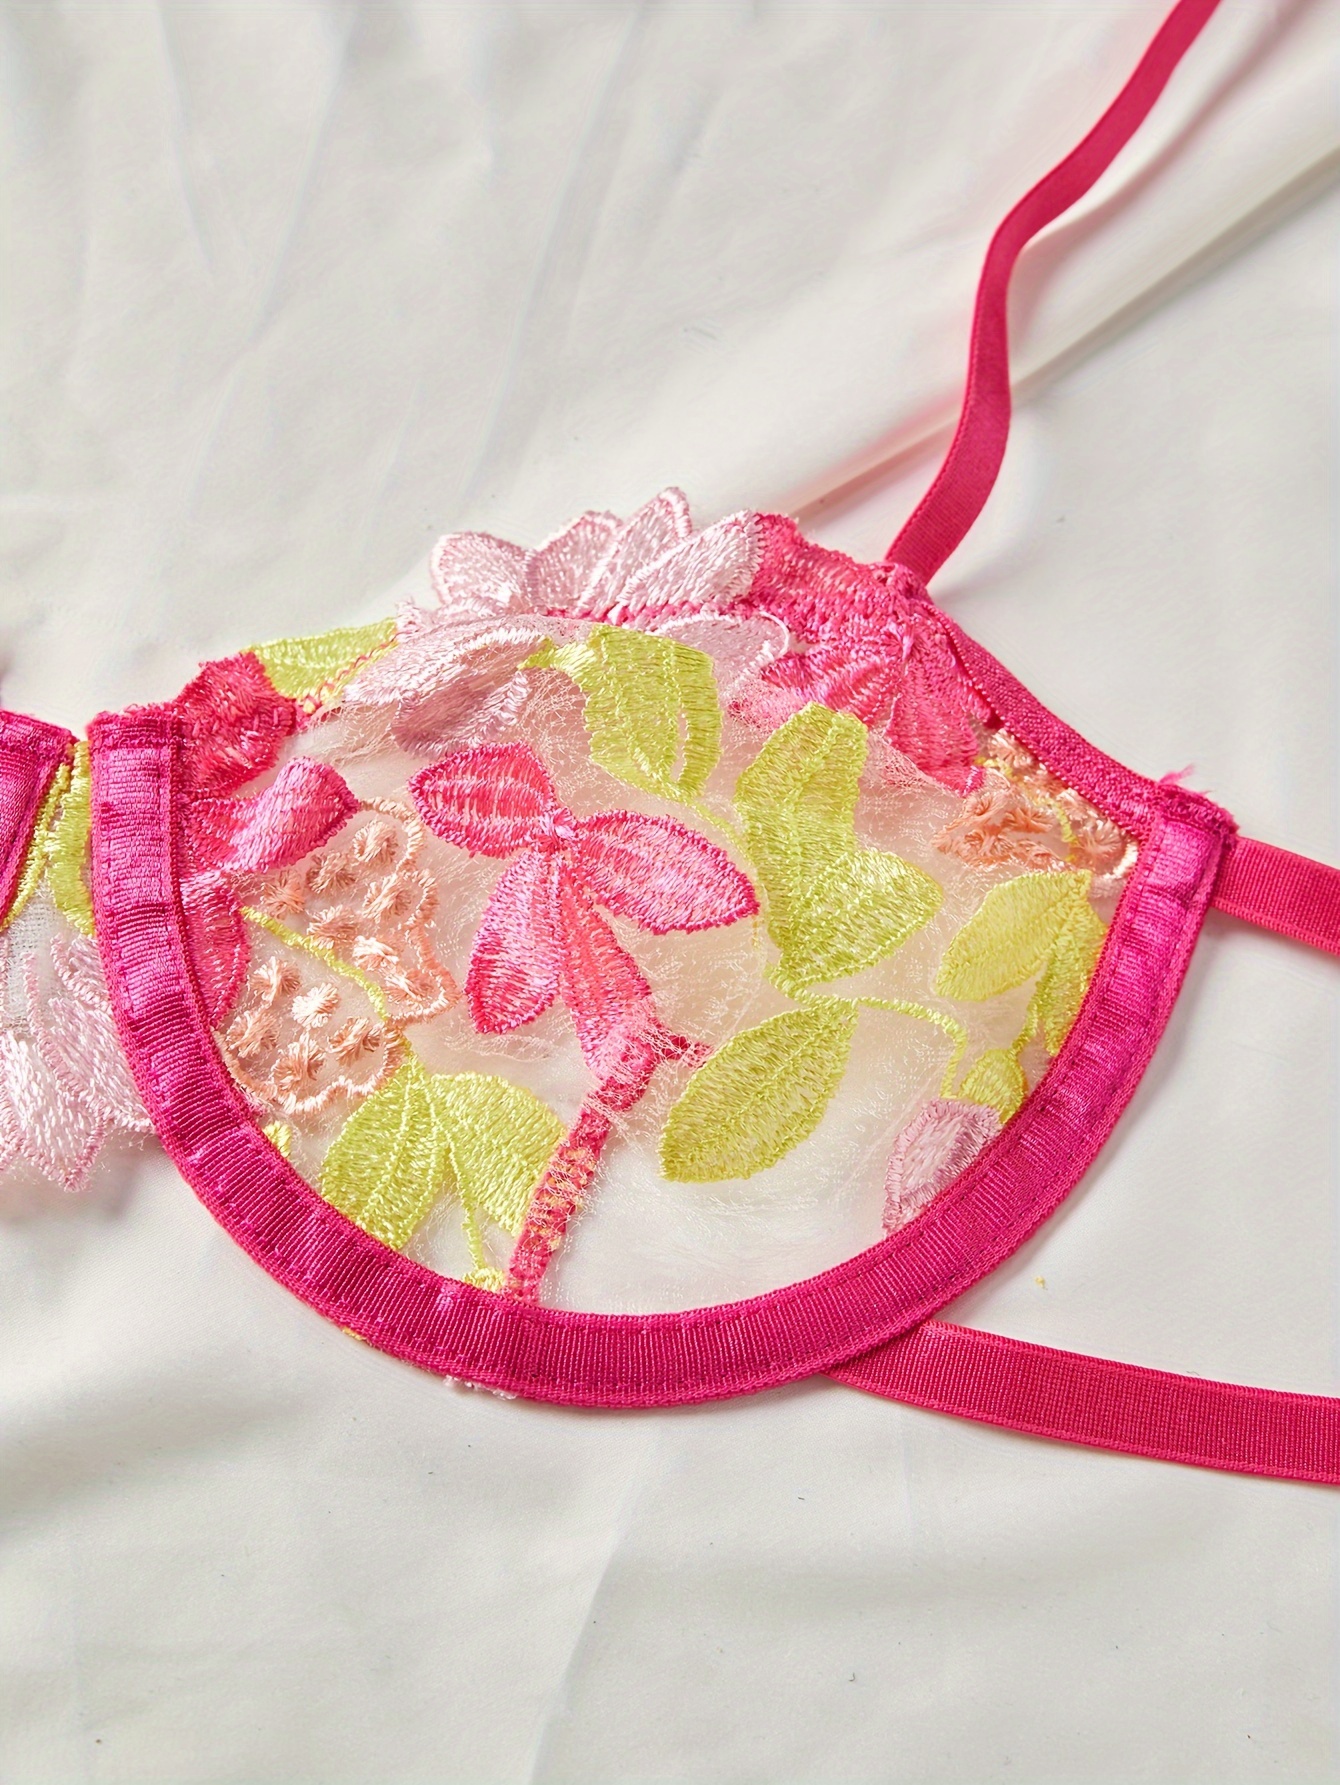 Spring breeze day embroidery bra tops & panty